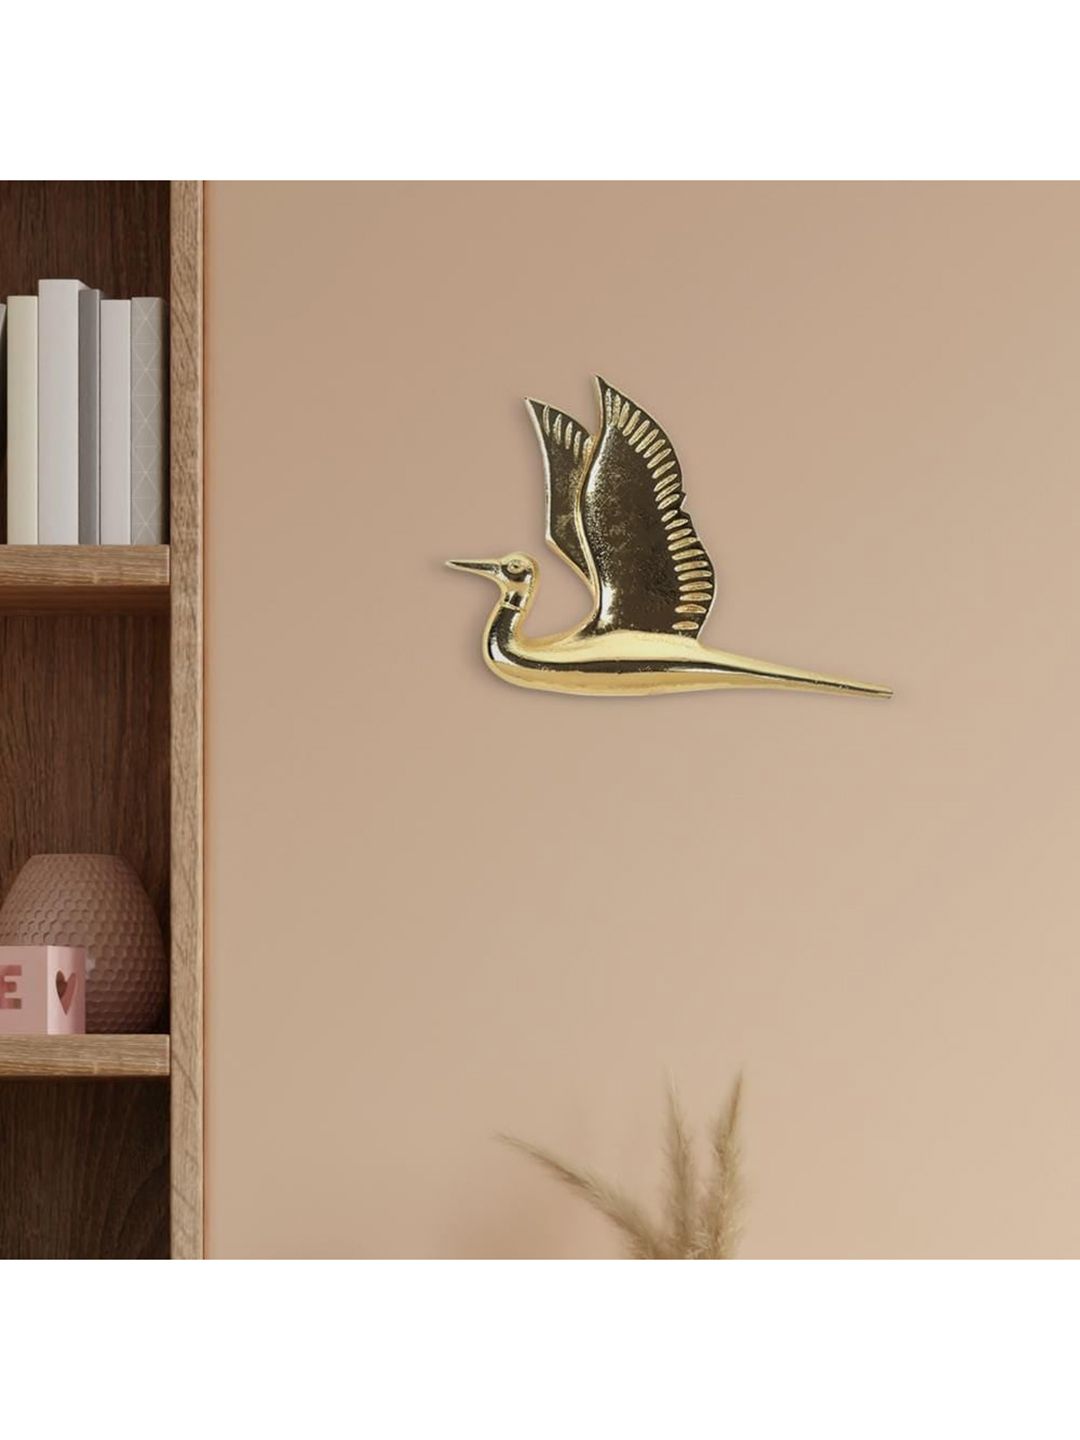 THE ARTMENT Set of 5 Gold-Coloured Flying Sparrow Wall Decor Price in India